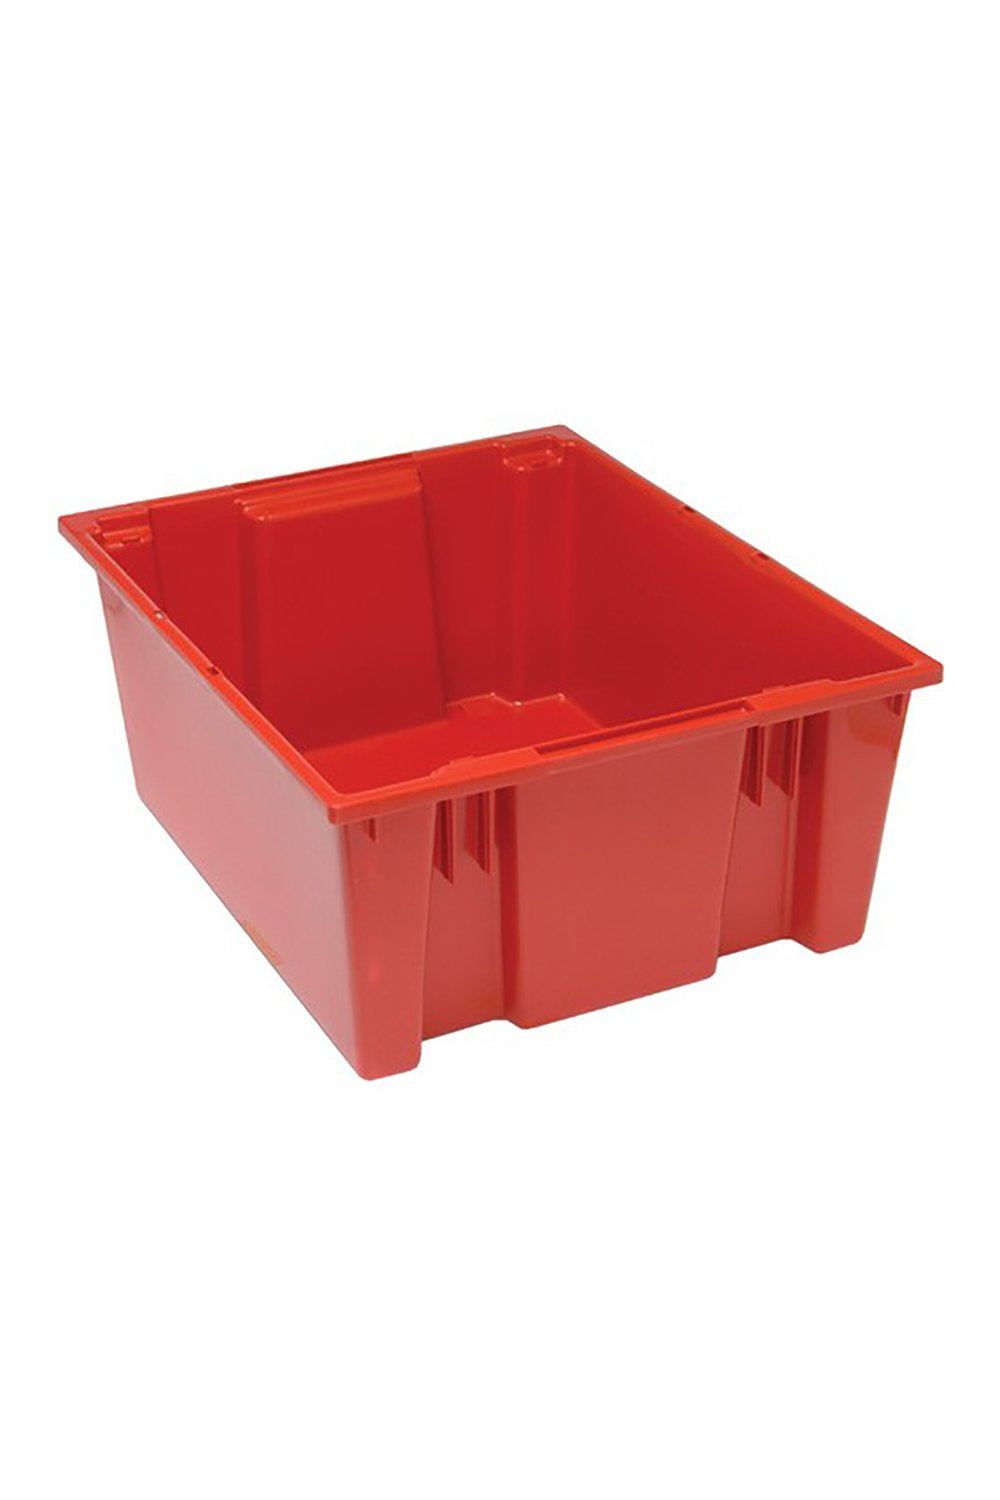 Stack and Nest Tote Bins & Containers Acart 23-1/2"L x 19-1/2"W x 10"H Red 